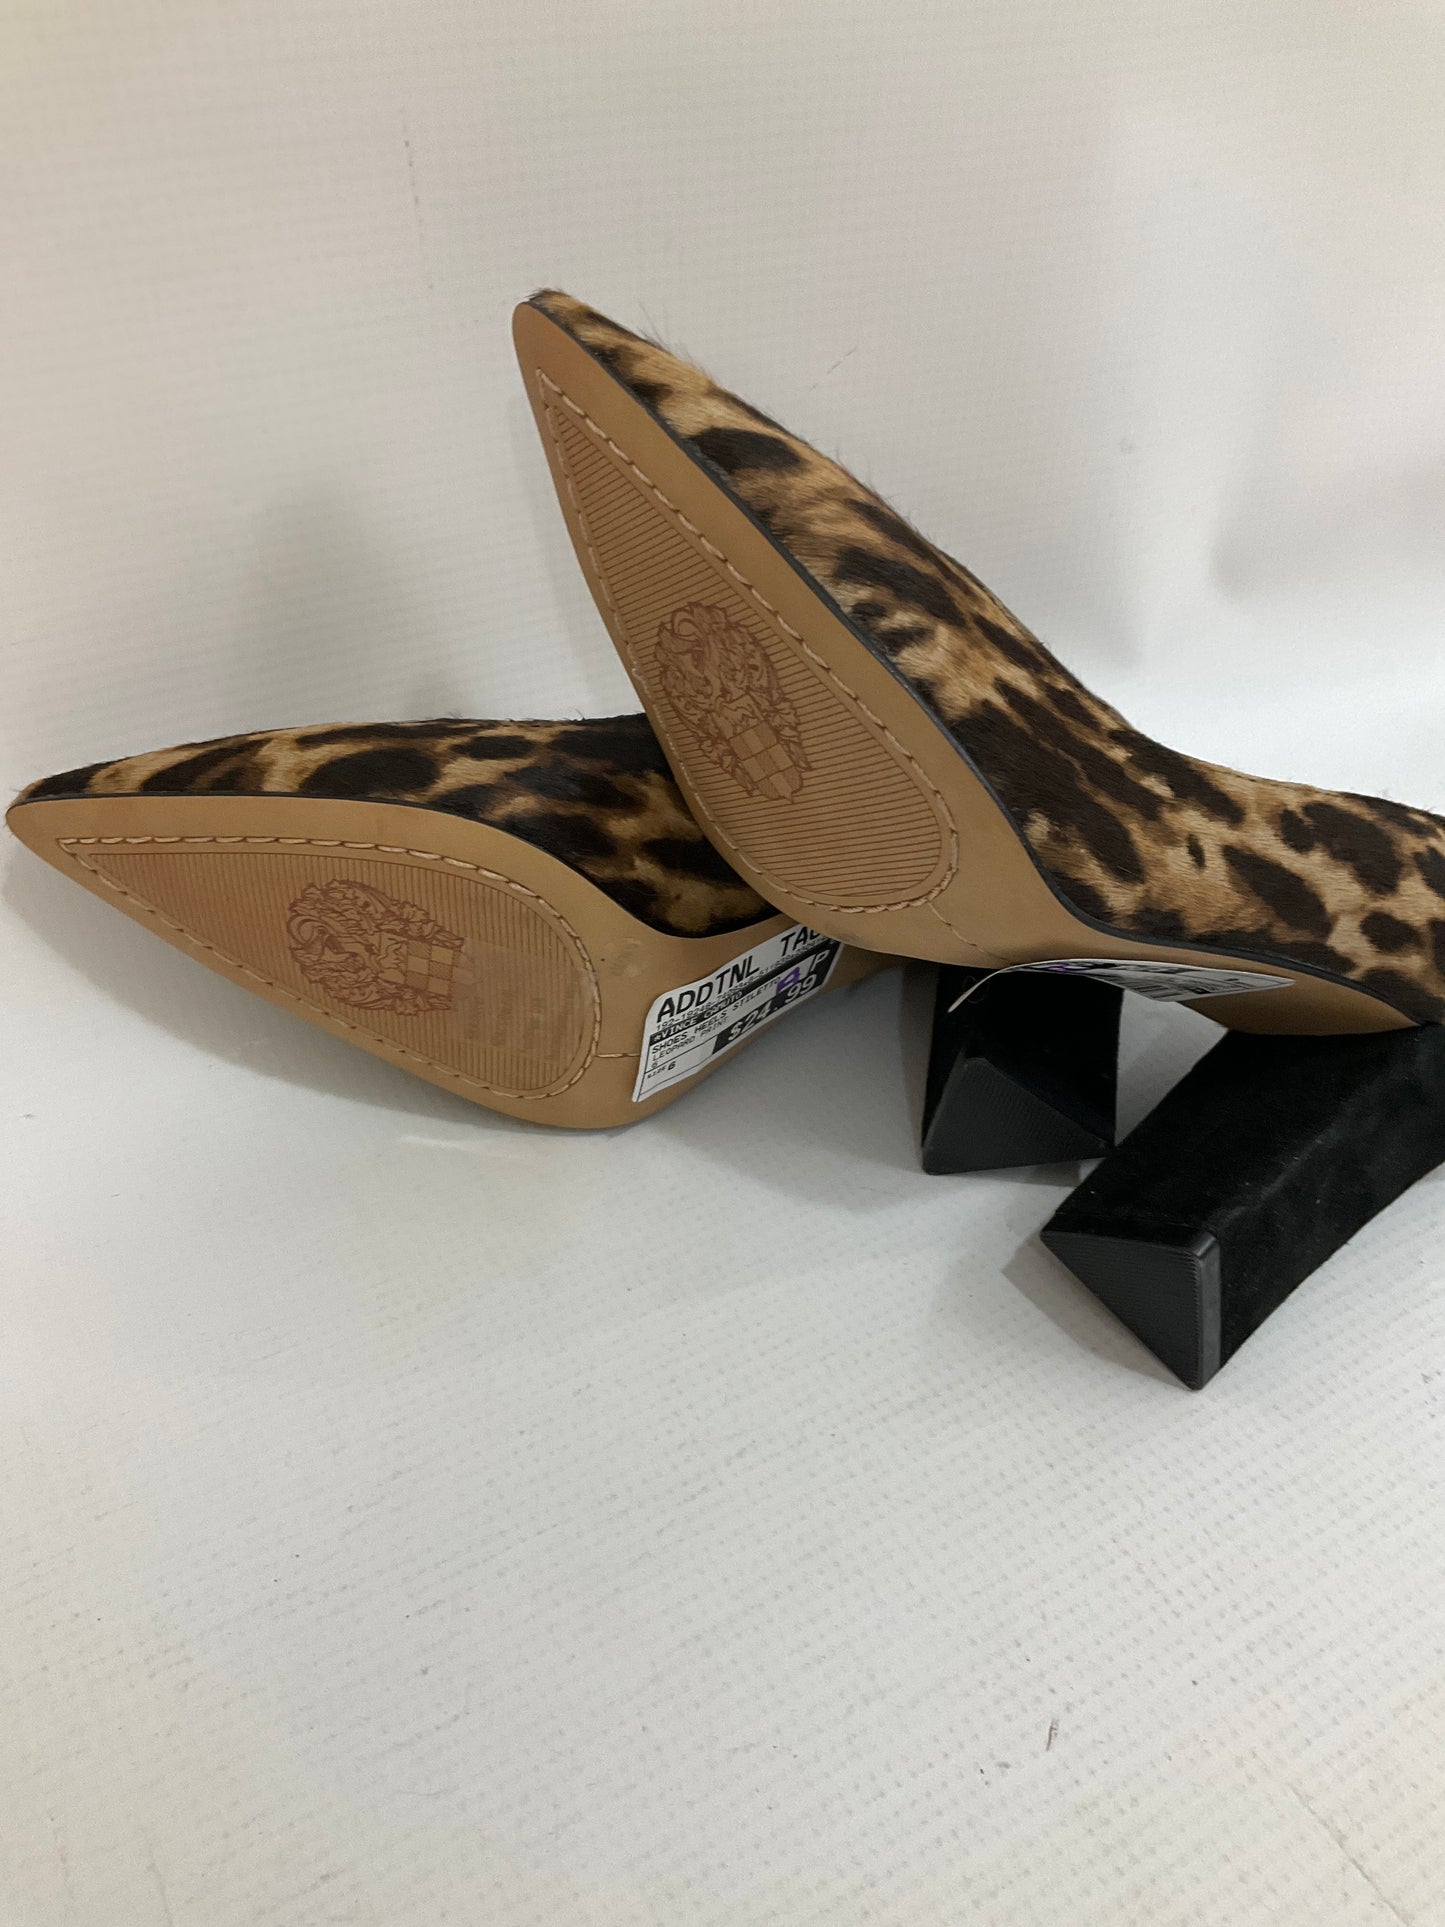 Shoes Heels Stiletto By Vince Camuto  Size: 6